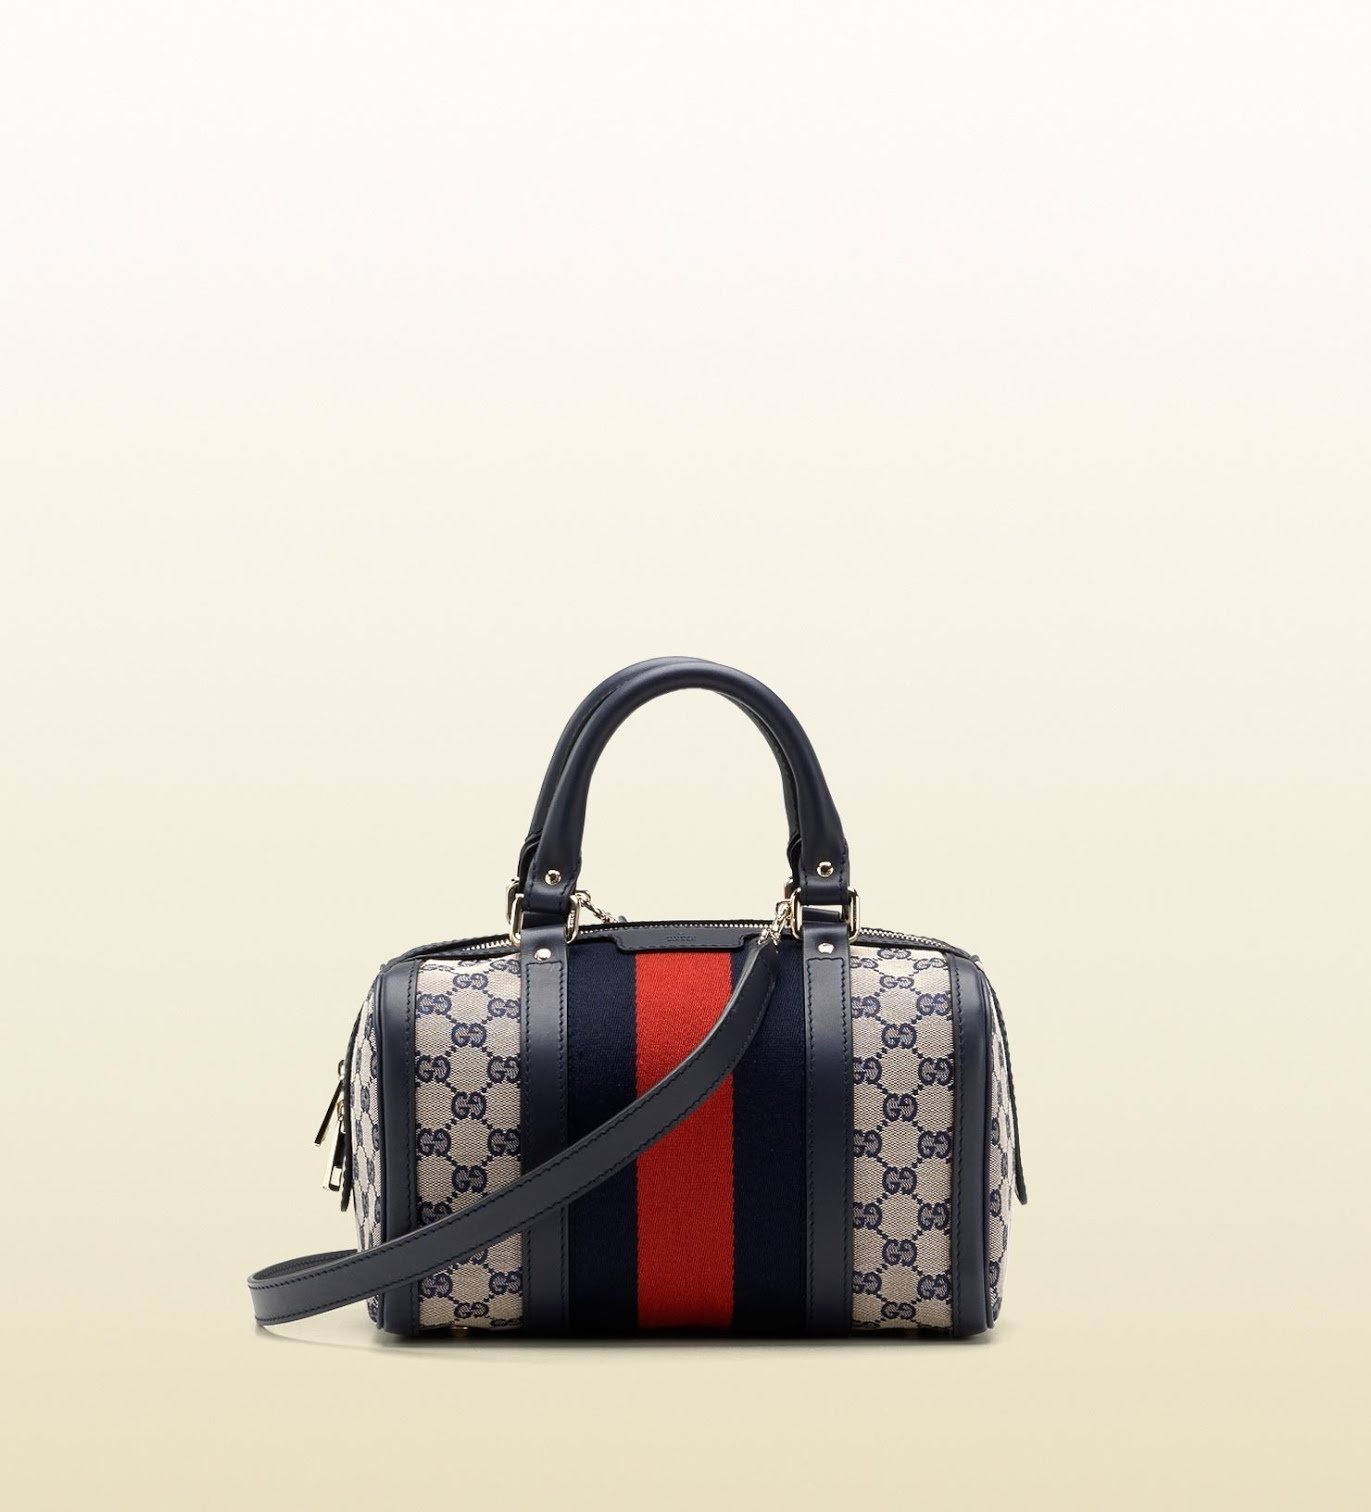 Simple tips to check if your Gucci bag is real! 🧐 #fyp #authenticati... |  Gucci | TikTok